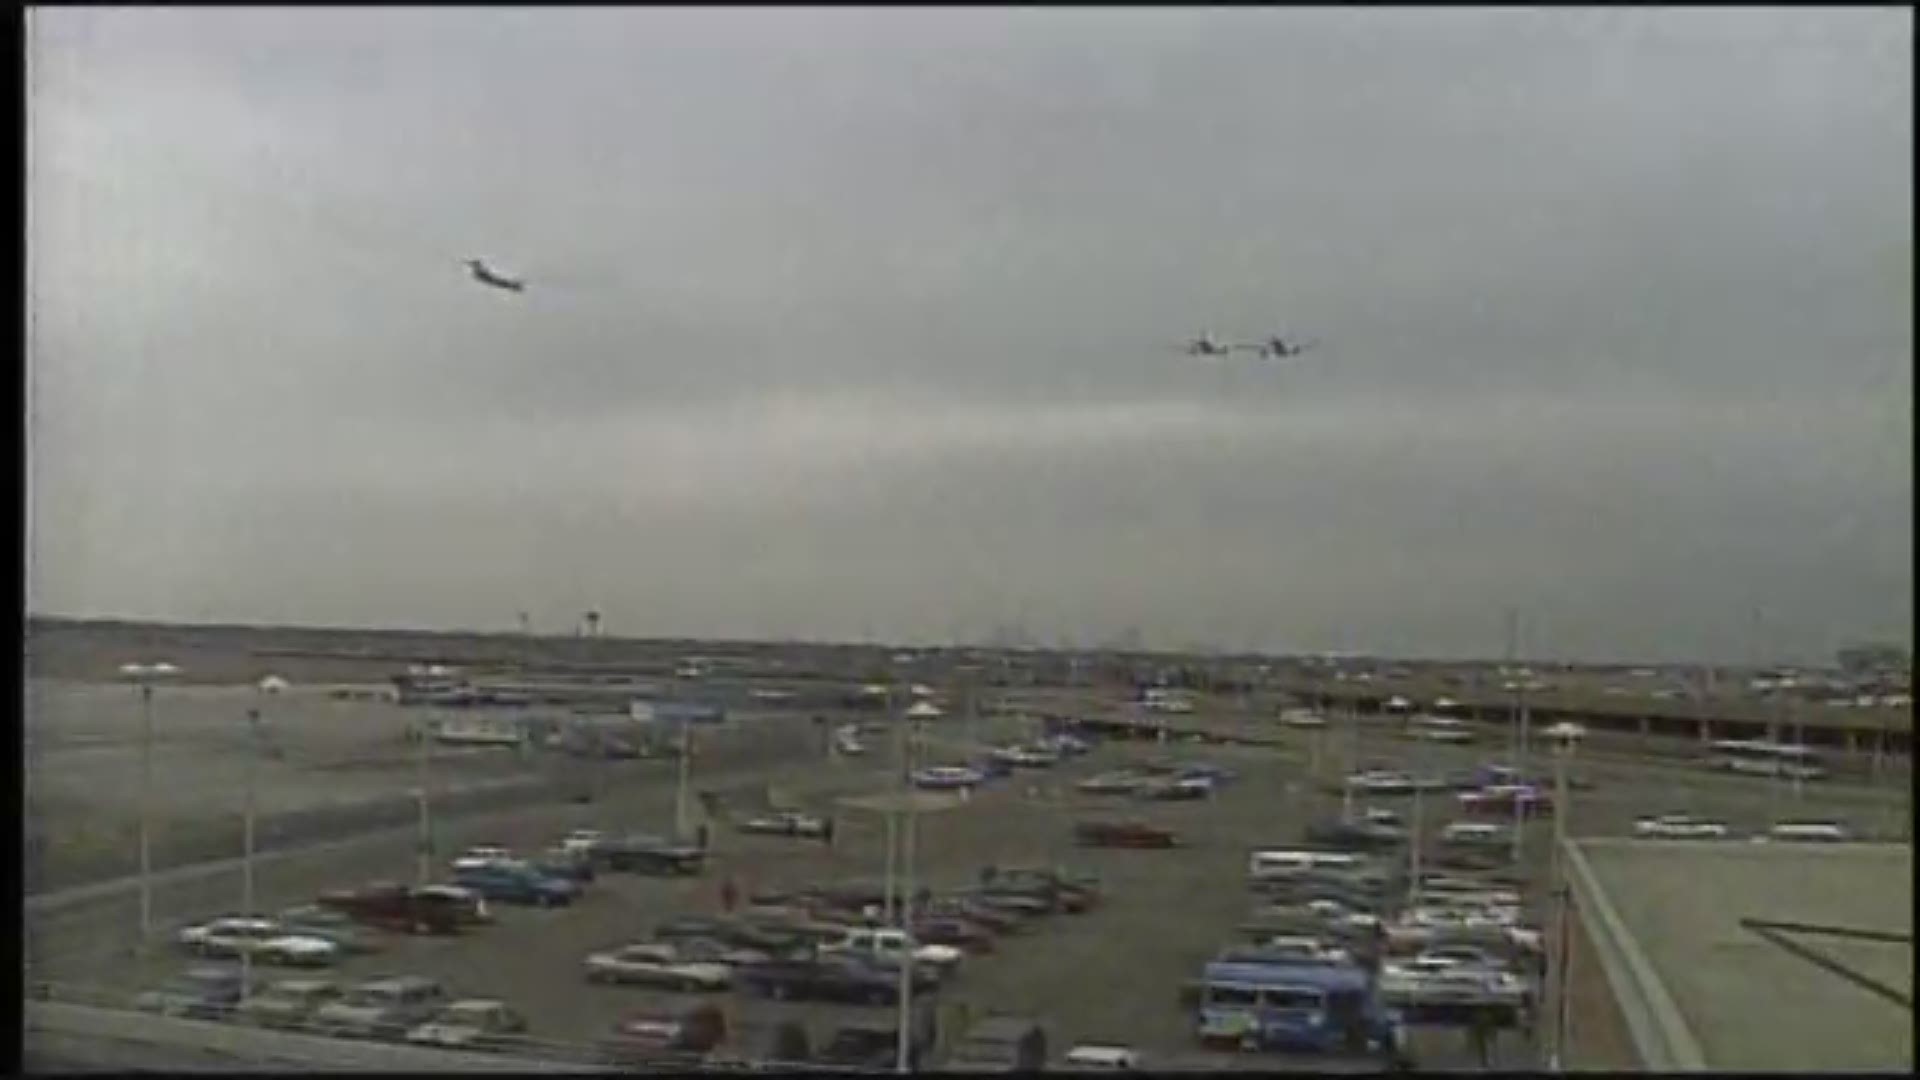 This is the final flyover at Stapleton International Airport, which was replaced by Denver International Airport on February 28, 1995.